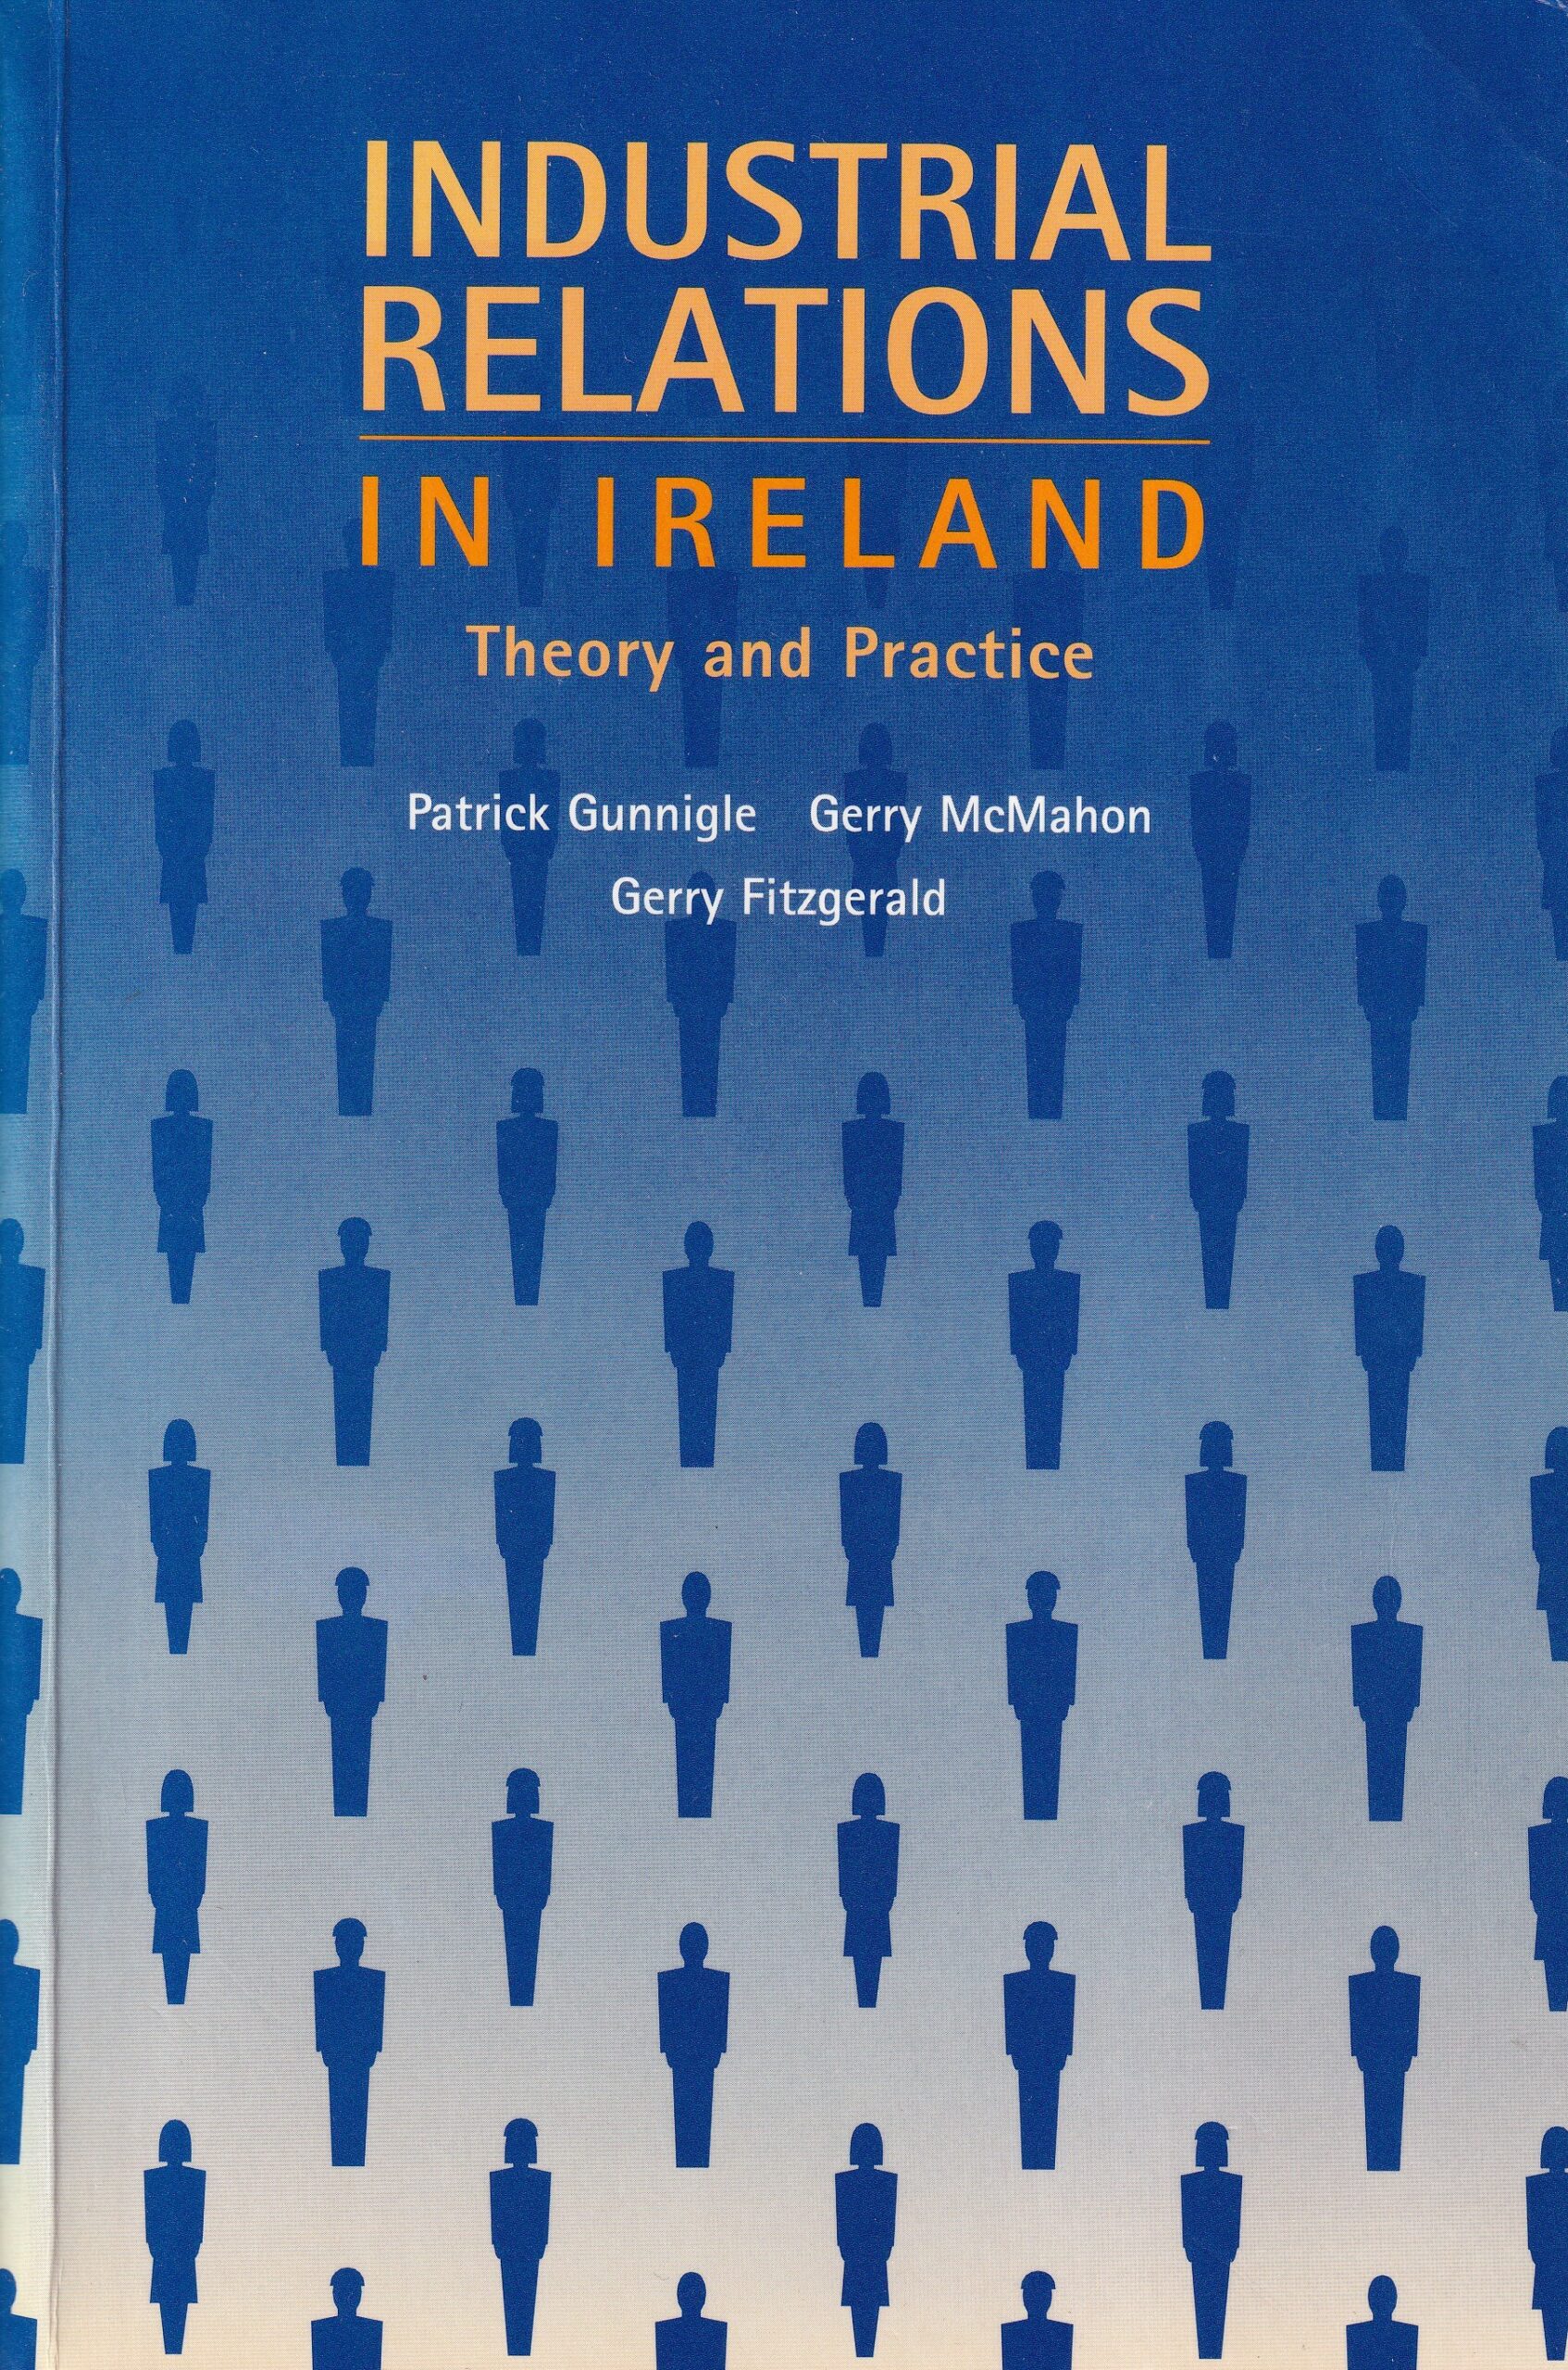 Industrial Relations in Ireland: Theory and Practise by Gerry Fitzgerald, Patrick Gunnigle and Gerry McMahon (eds.)